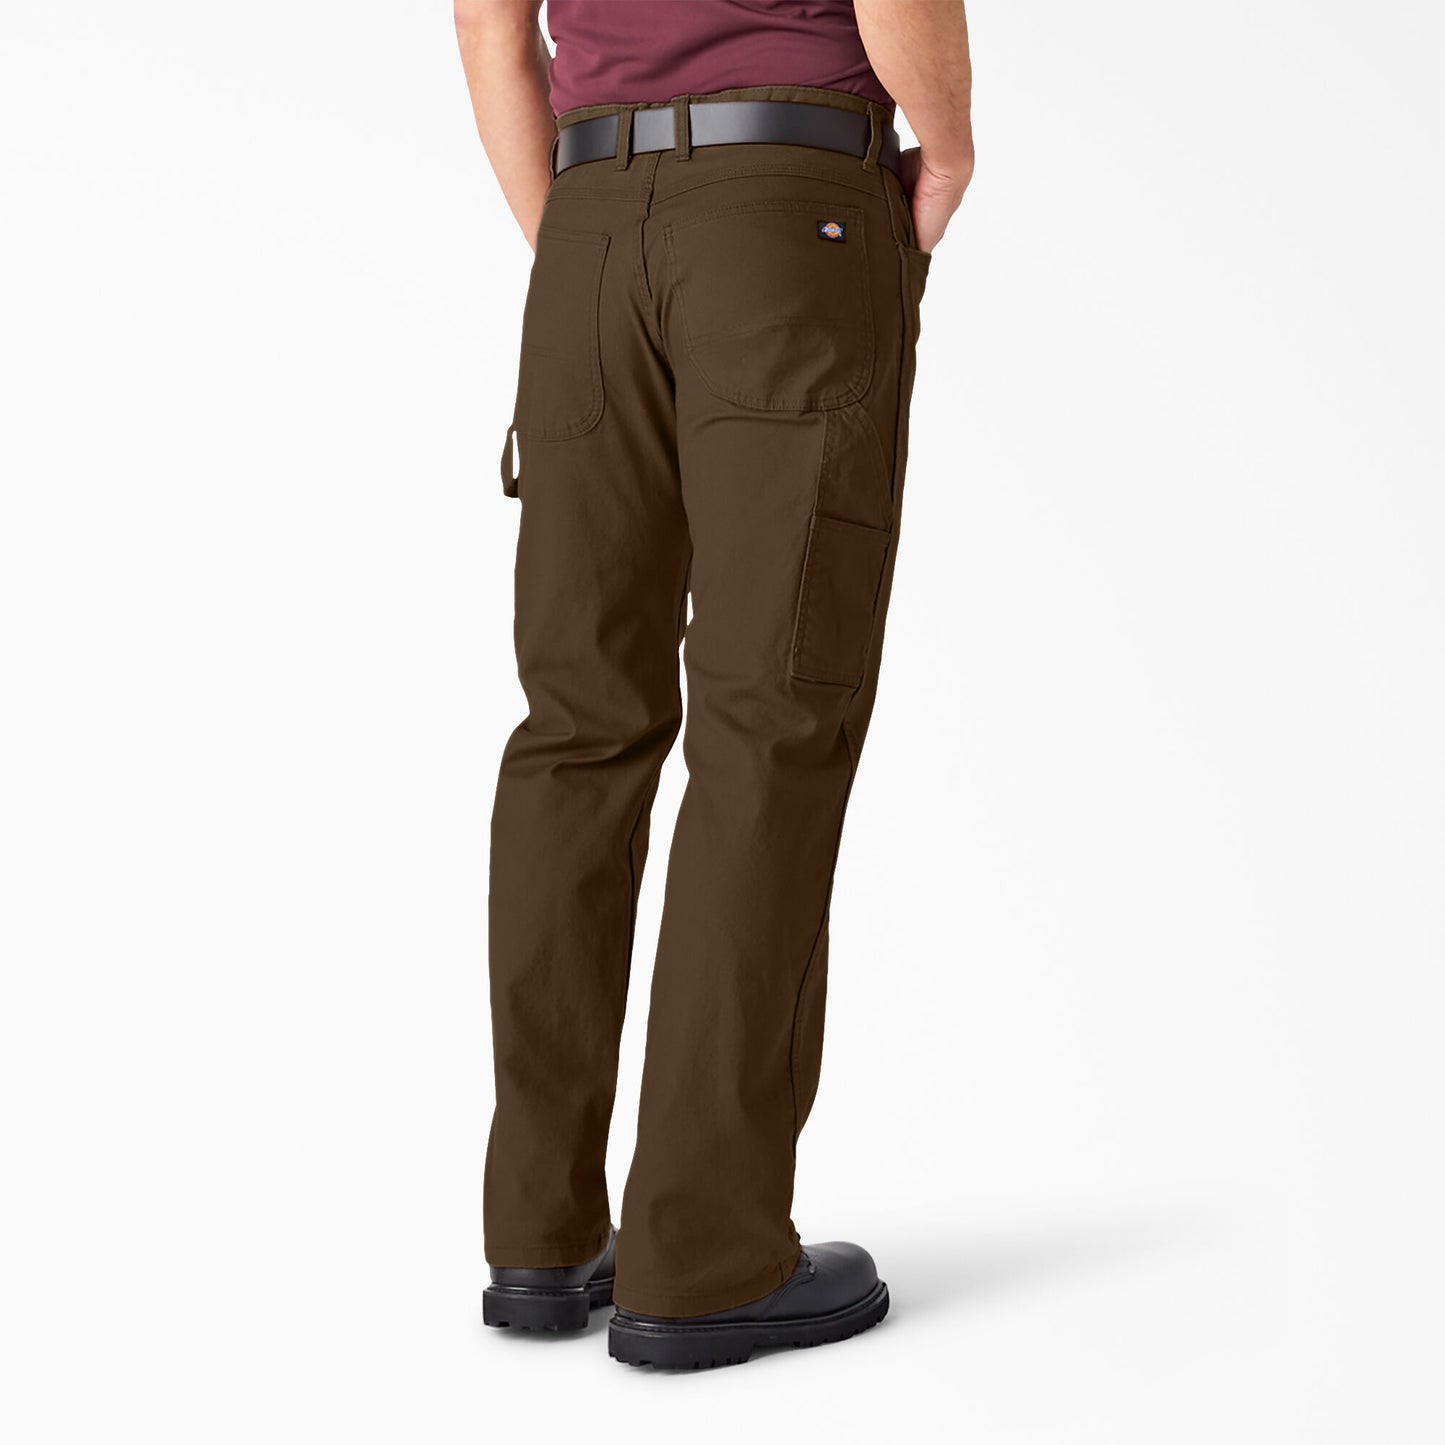 Dickies Relaxed Fit Heavyweight Duck Carpenter Pants - Rinsed Timber